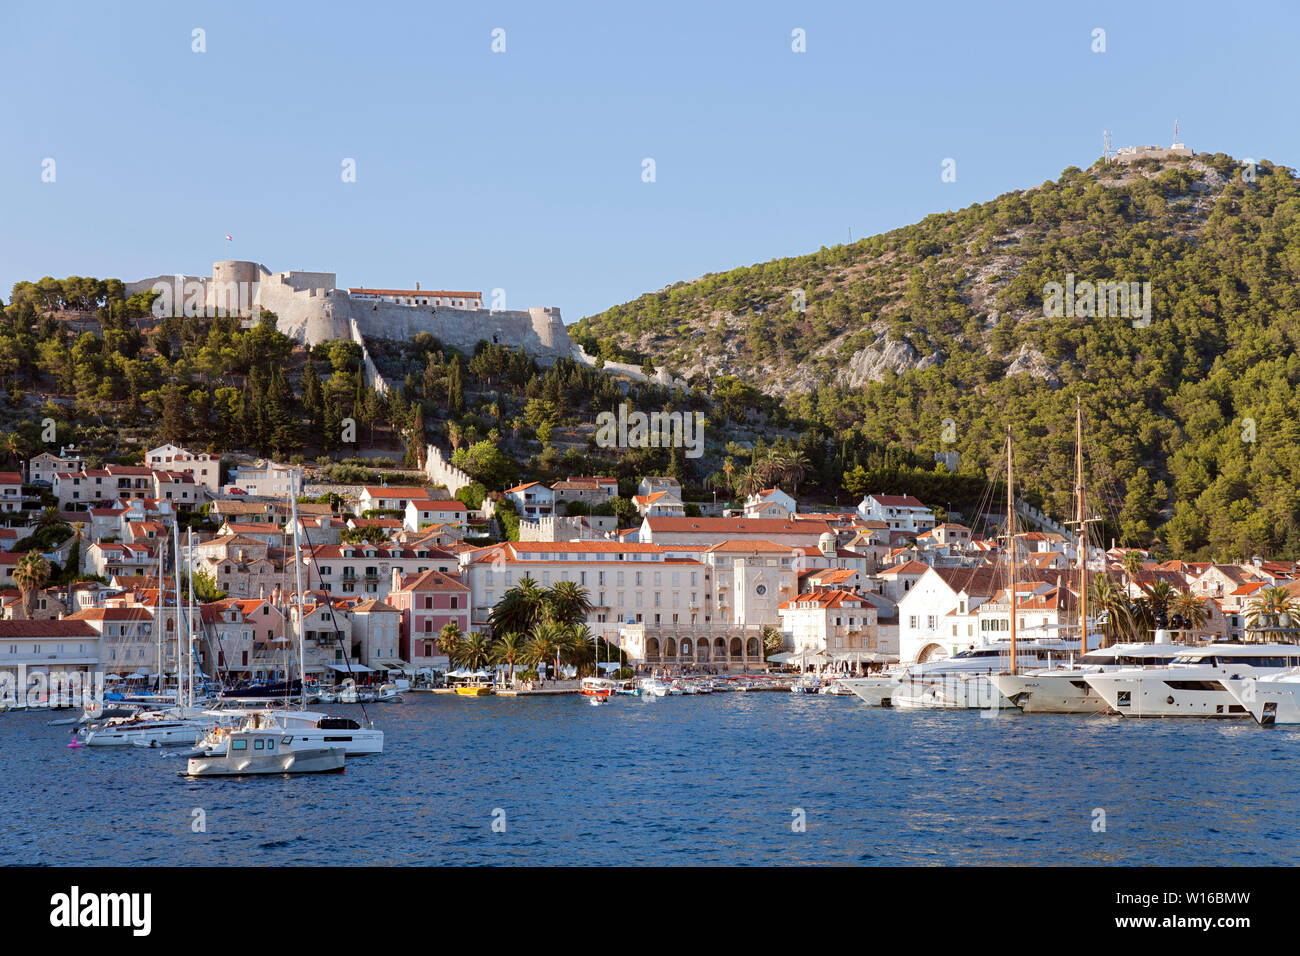 Hvar Town and its harbor as seen from a sea approach.  This Adriatic playground attracts celebrities and mega-yachts. Stock Photo